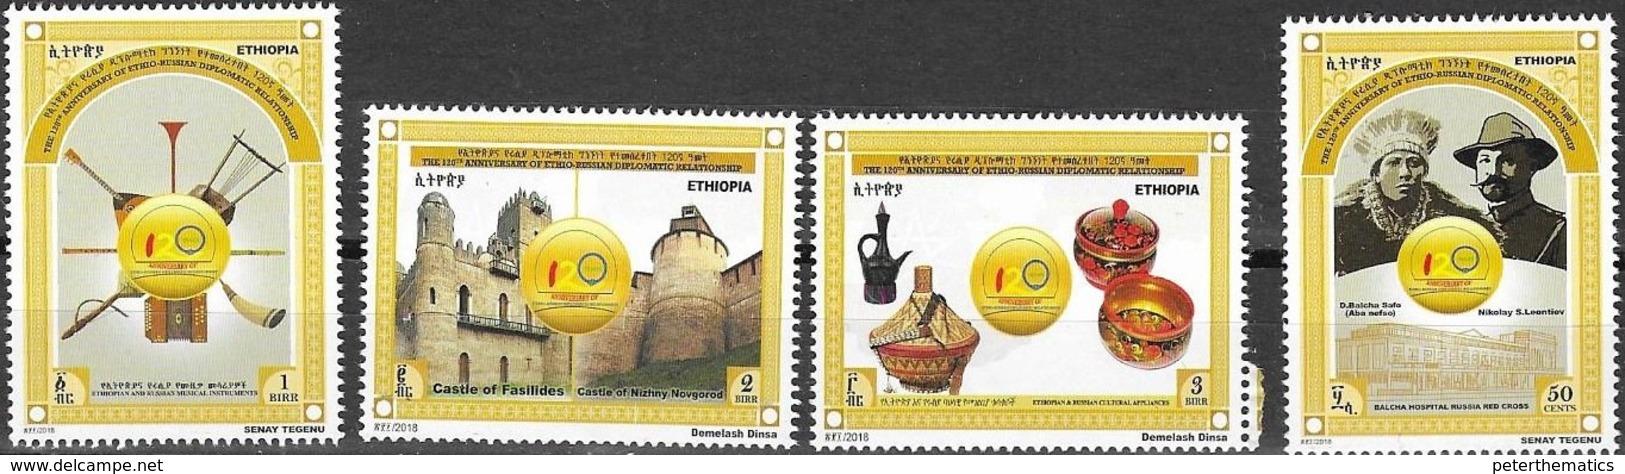 ETHIOPIA, 2019, MNH, DIPLOMATIC RELATIONS WITH RUSSIA, MUSIC, MUSICAL INSTRUMENTS, 4v - Unclassified